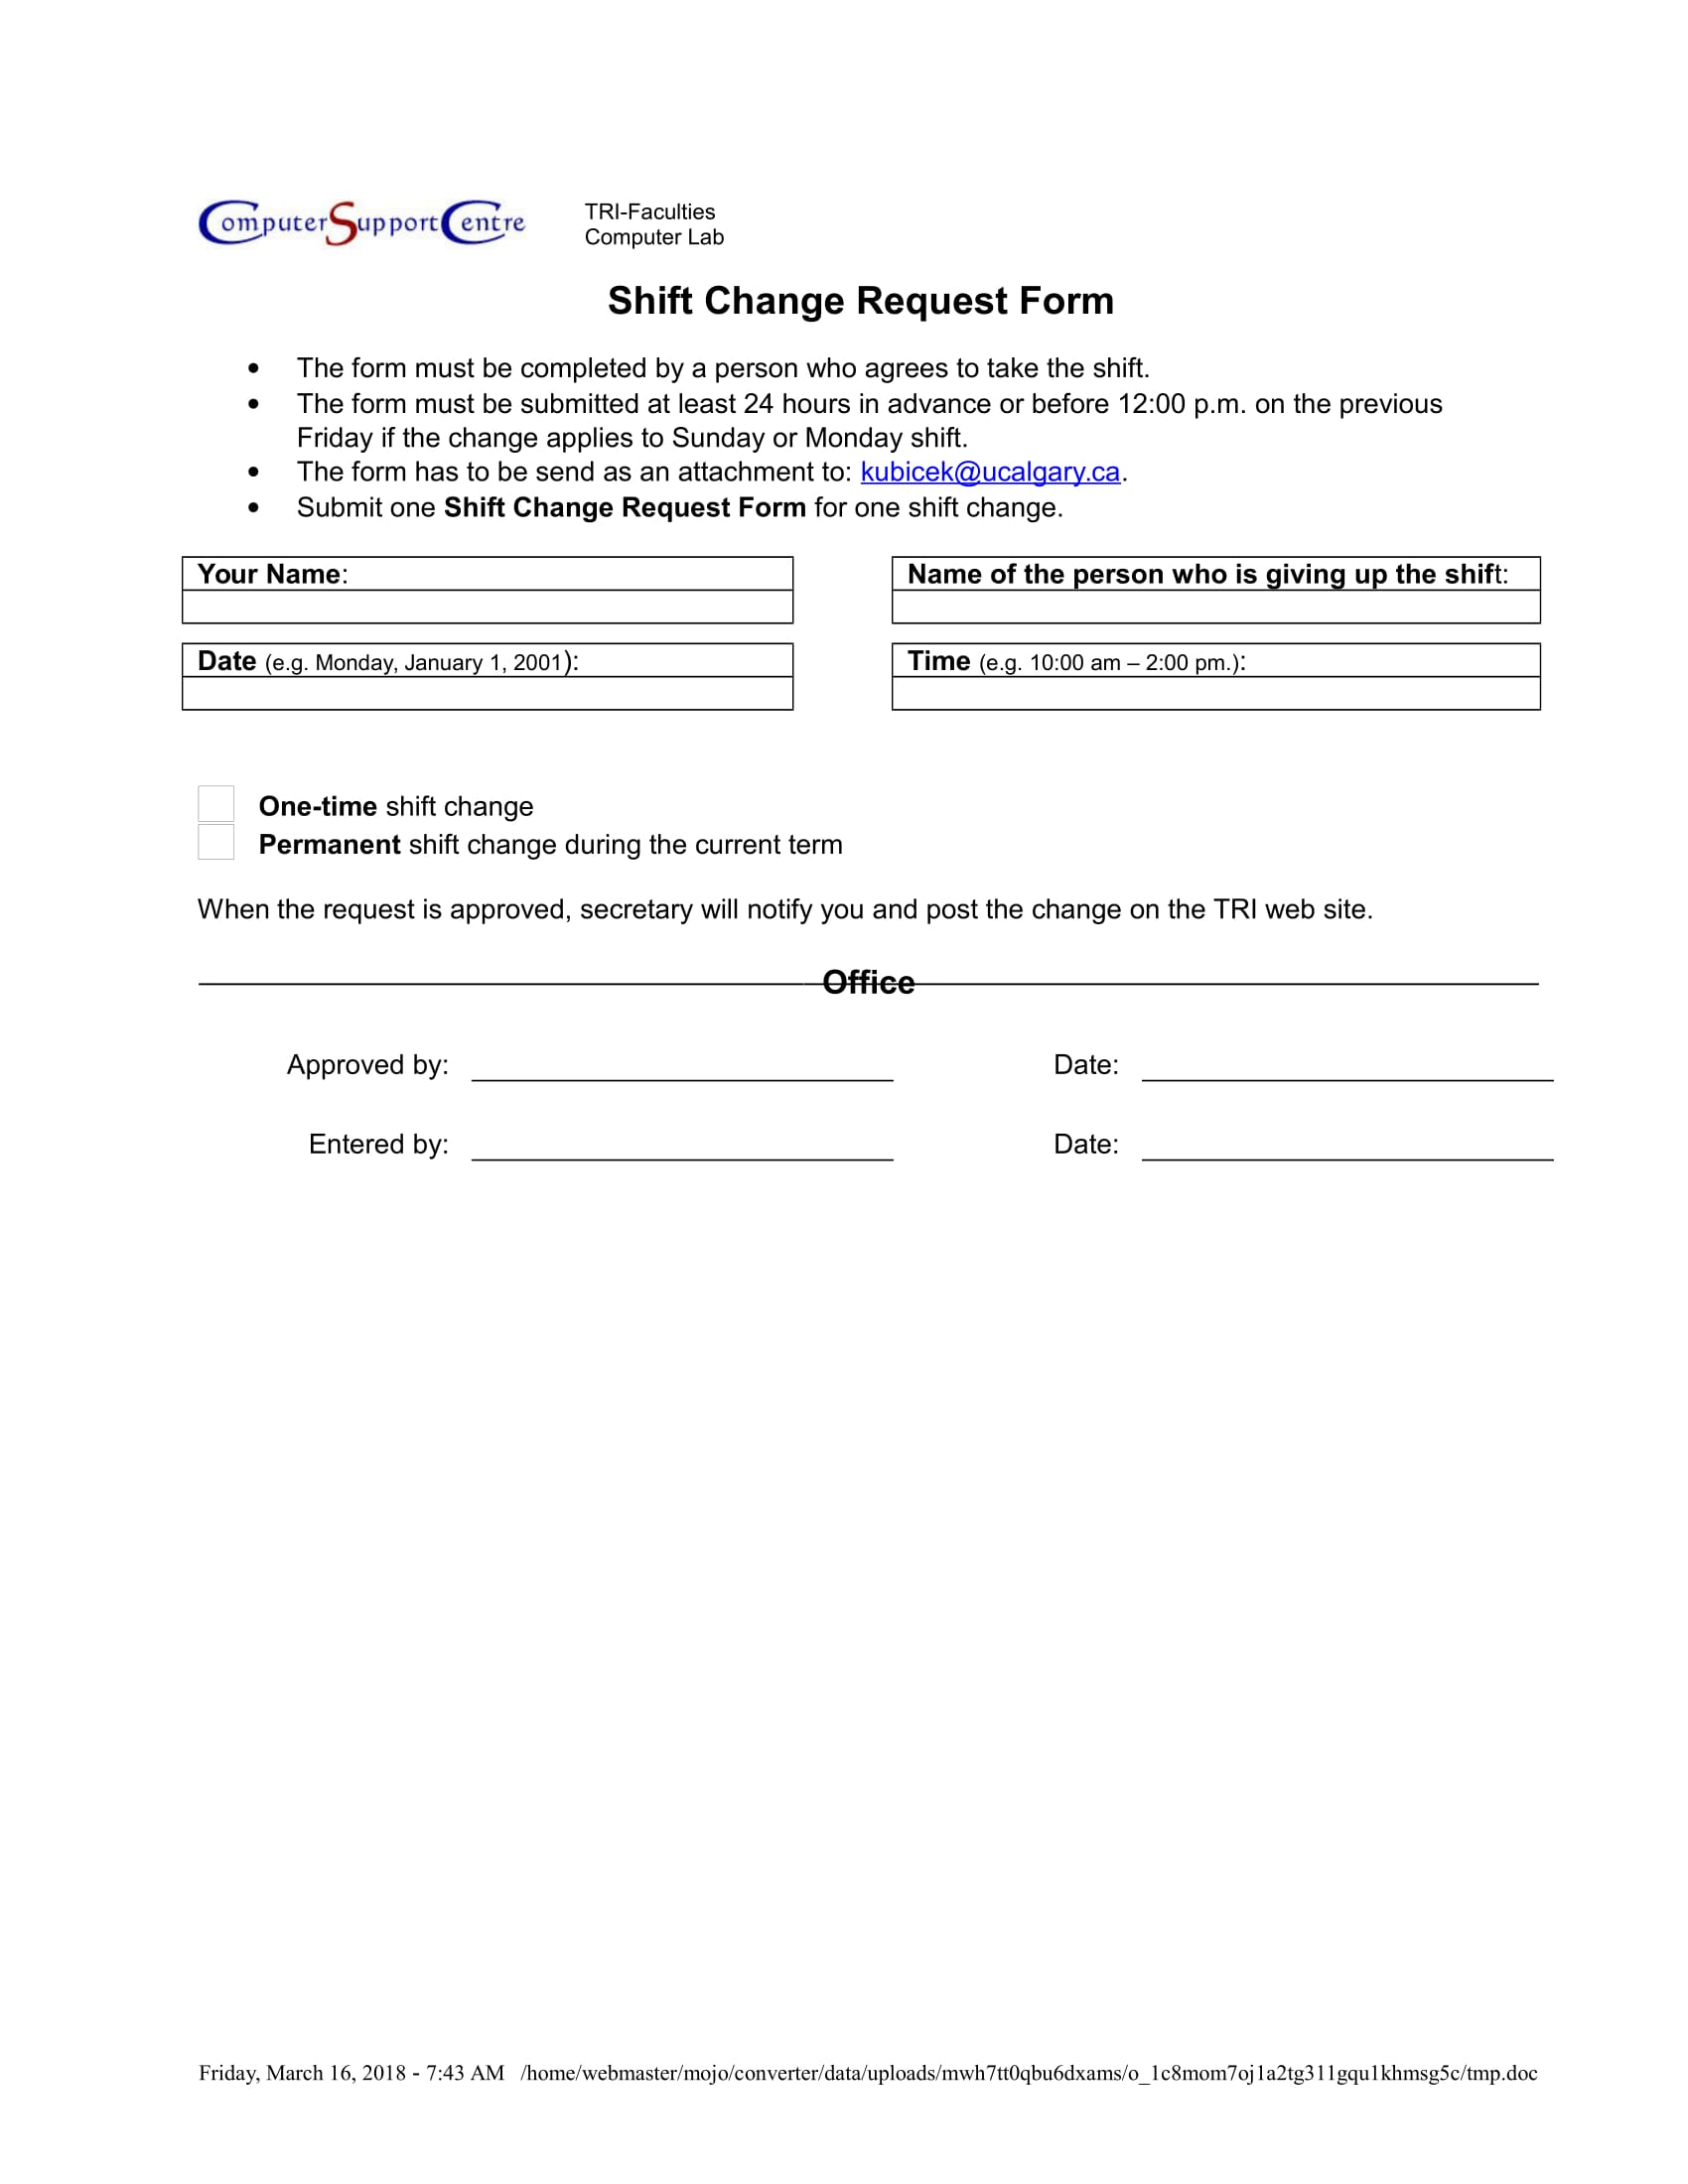 shift change request form in doc 1